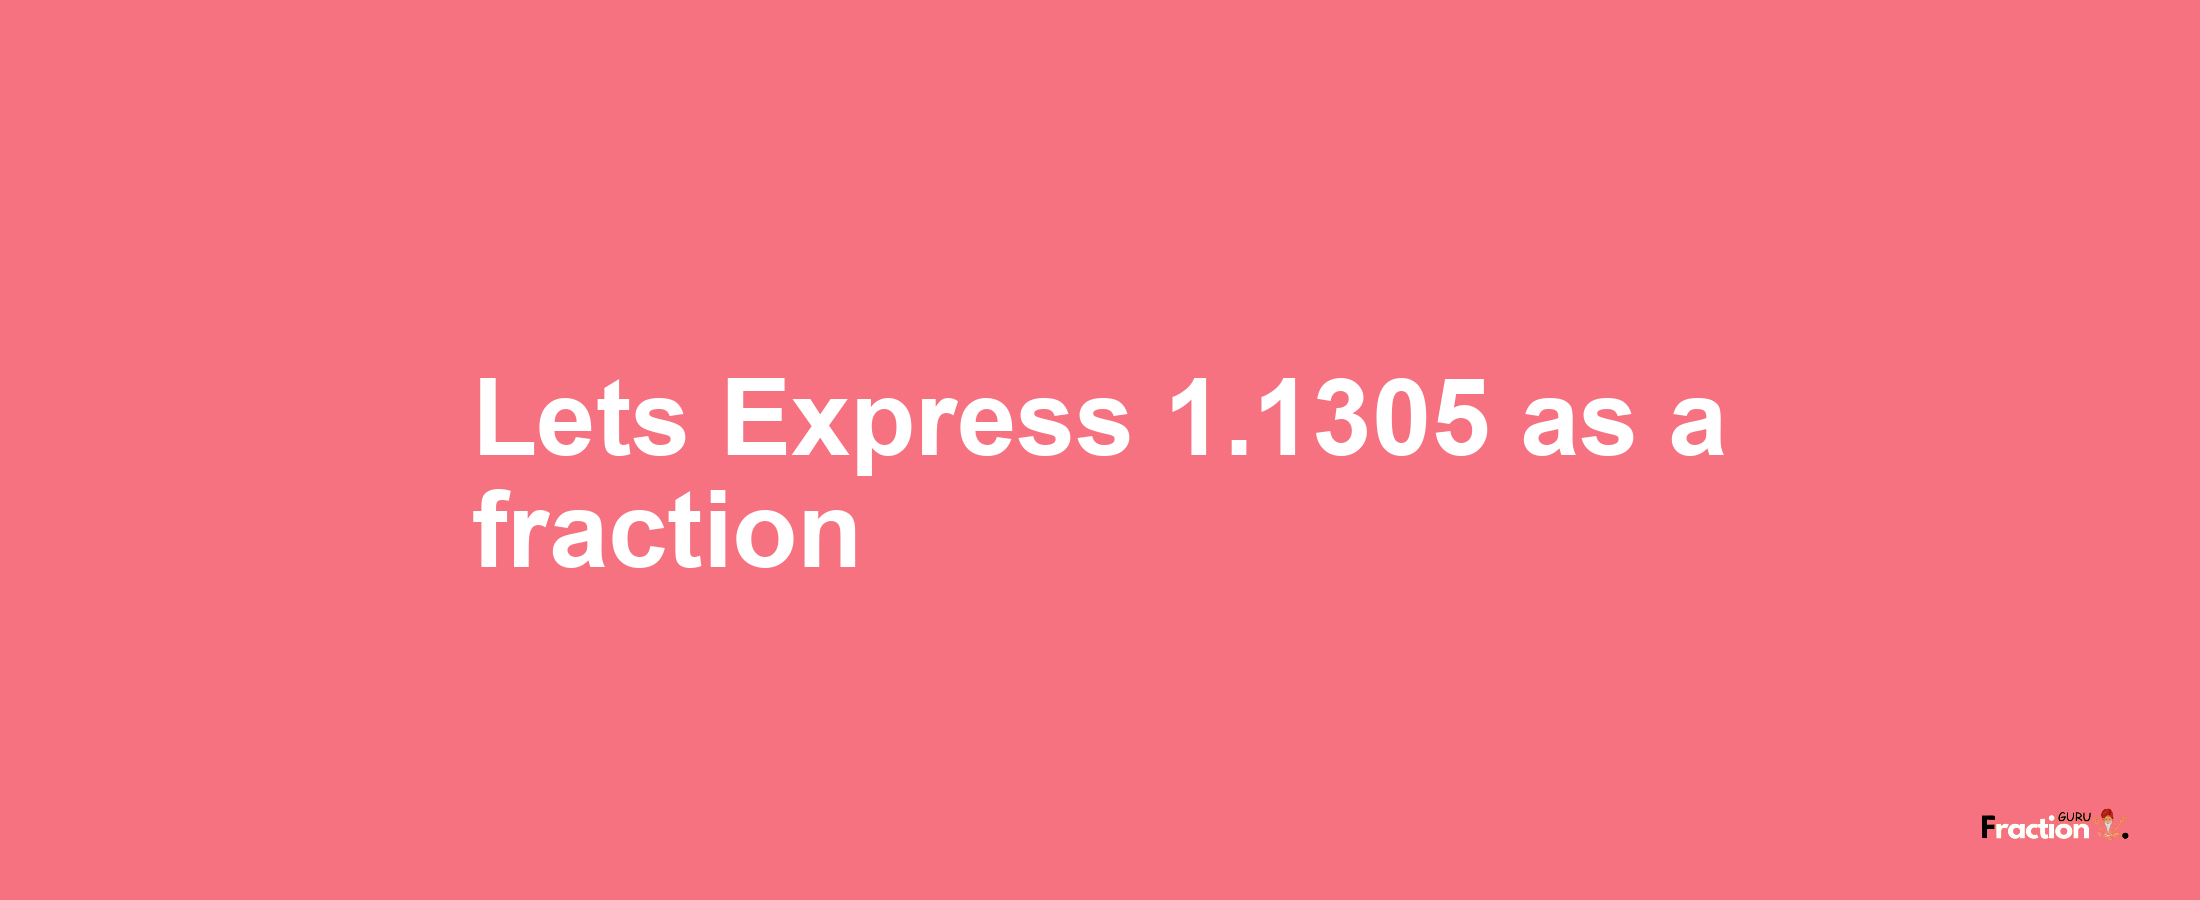 Lets Express 1.1305 as afraction